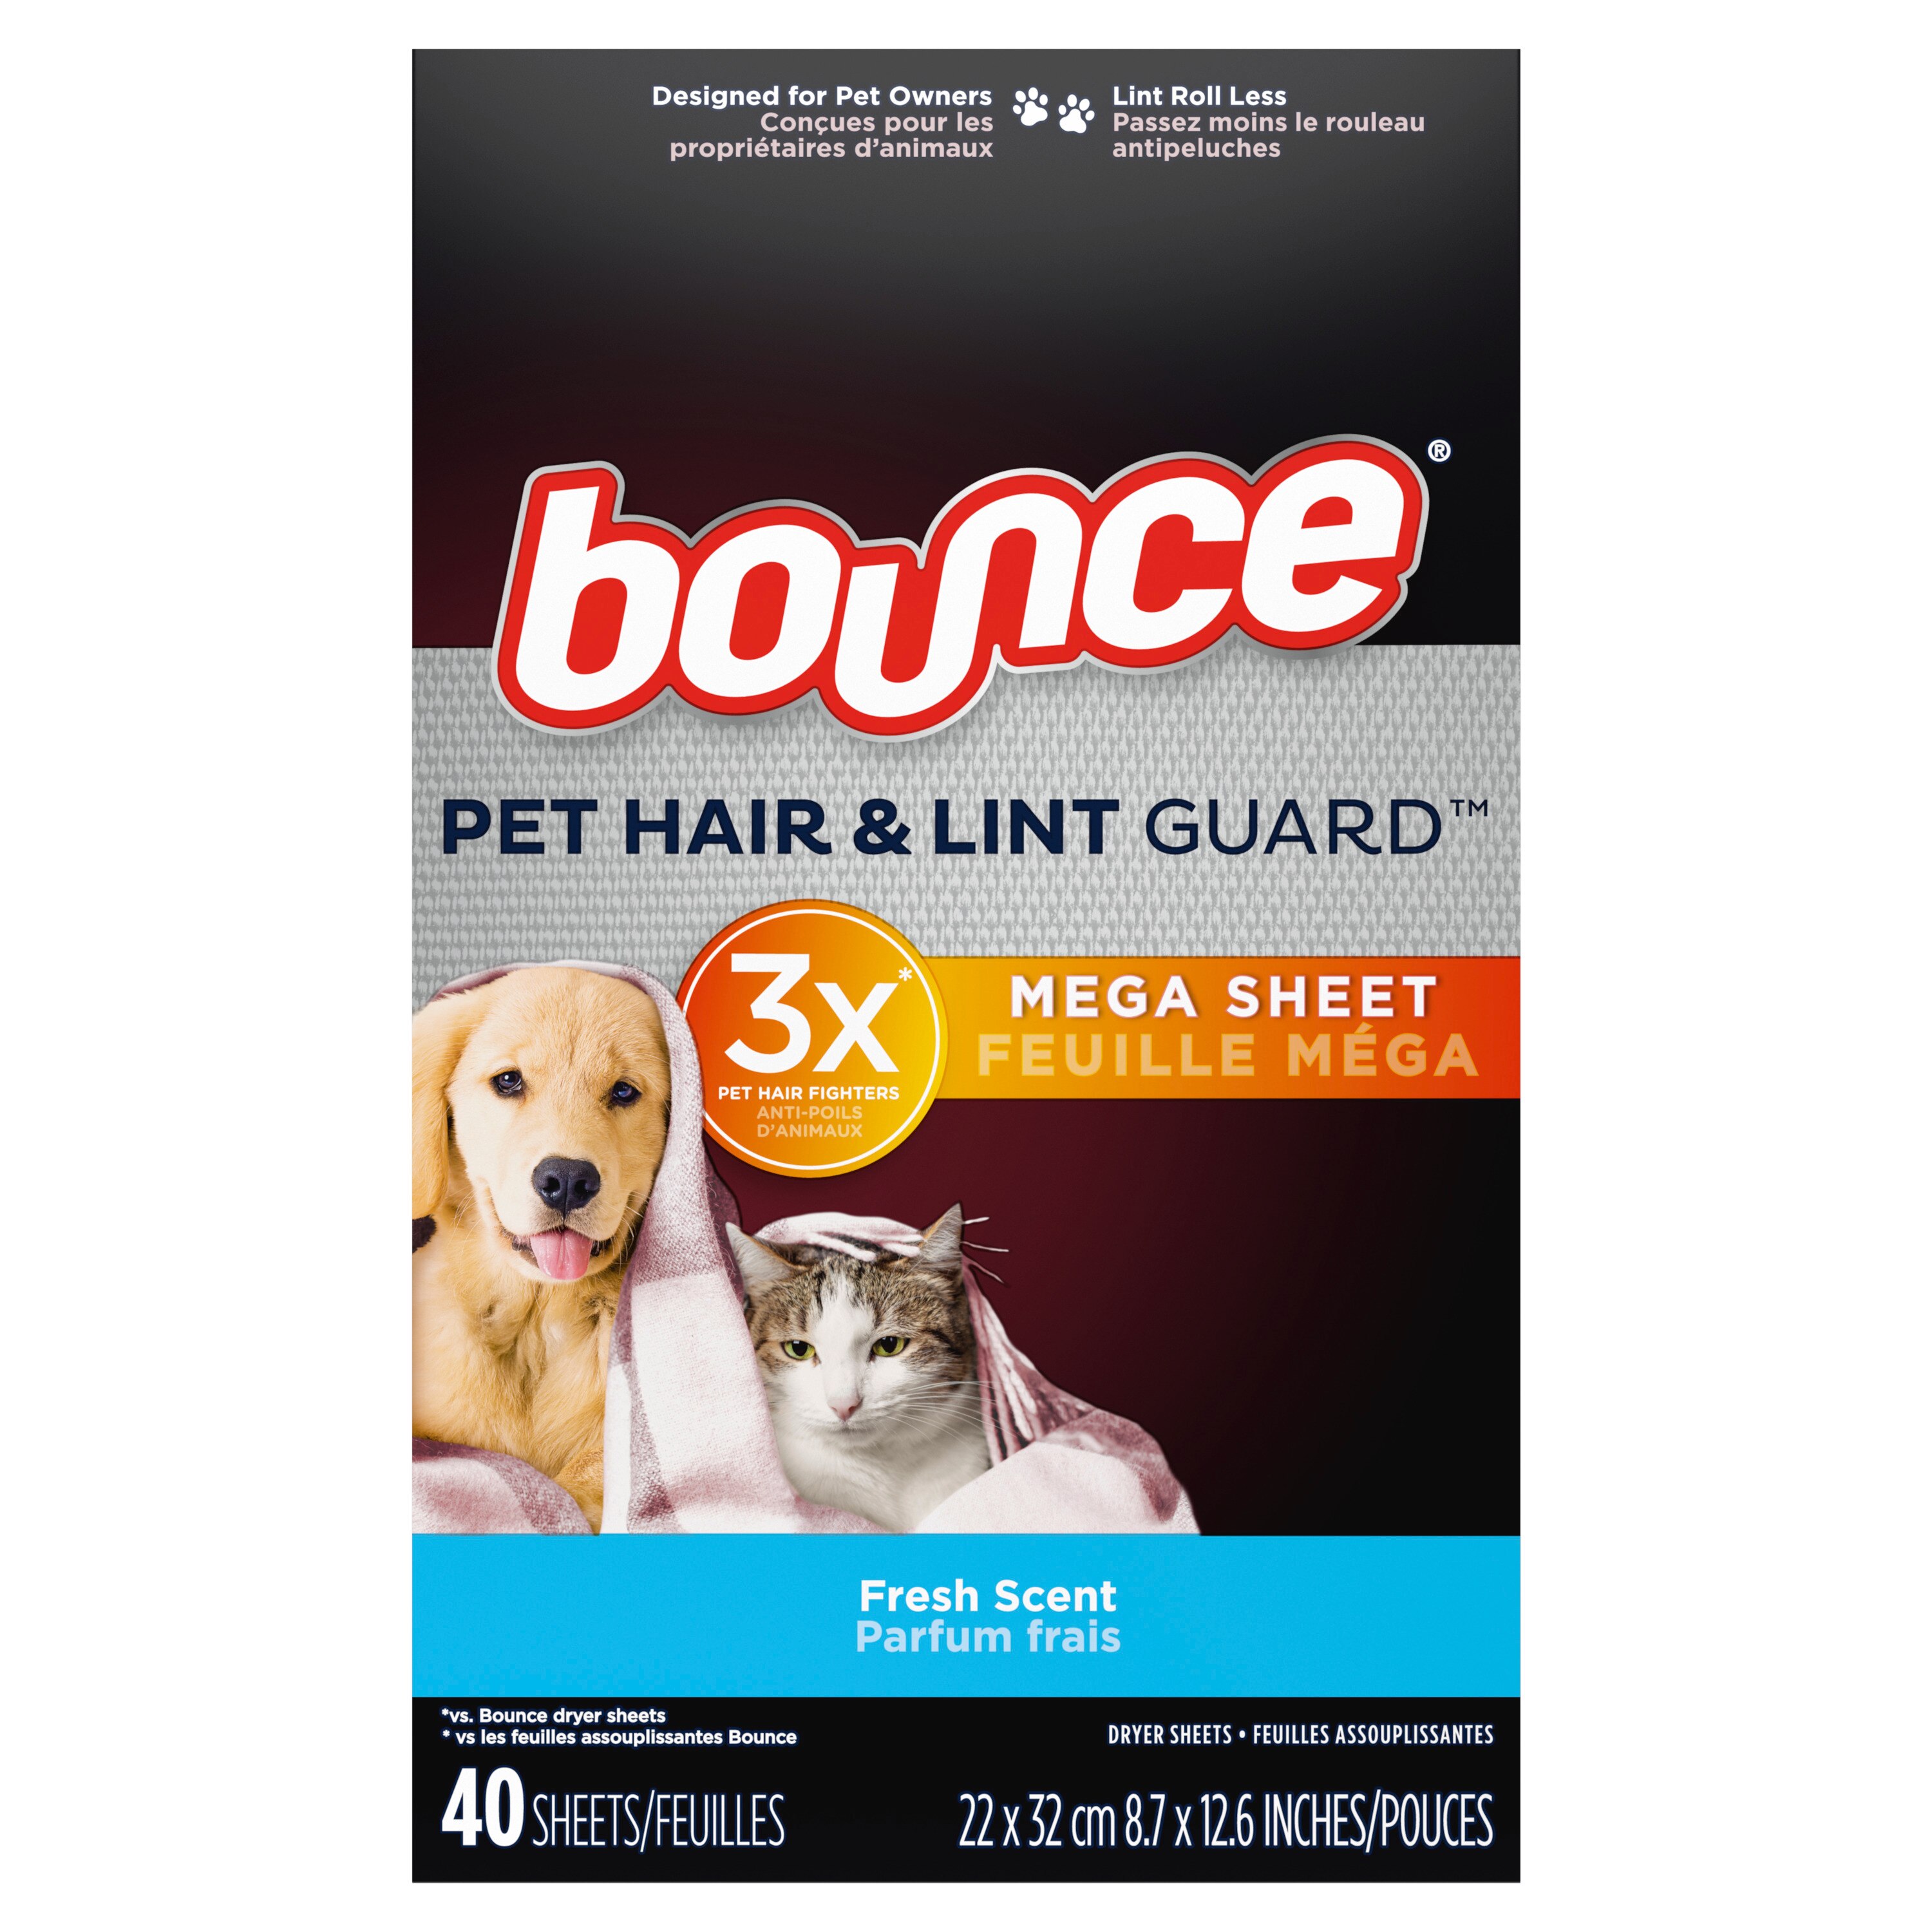 Bounce Pet Hair and Lint Guard Mega Dryer Sheets with 3X Pet Hair Fighters, Fresh Scent, 40 Count